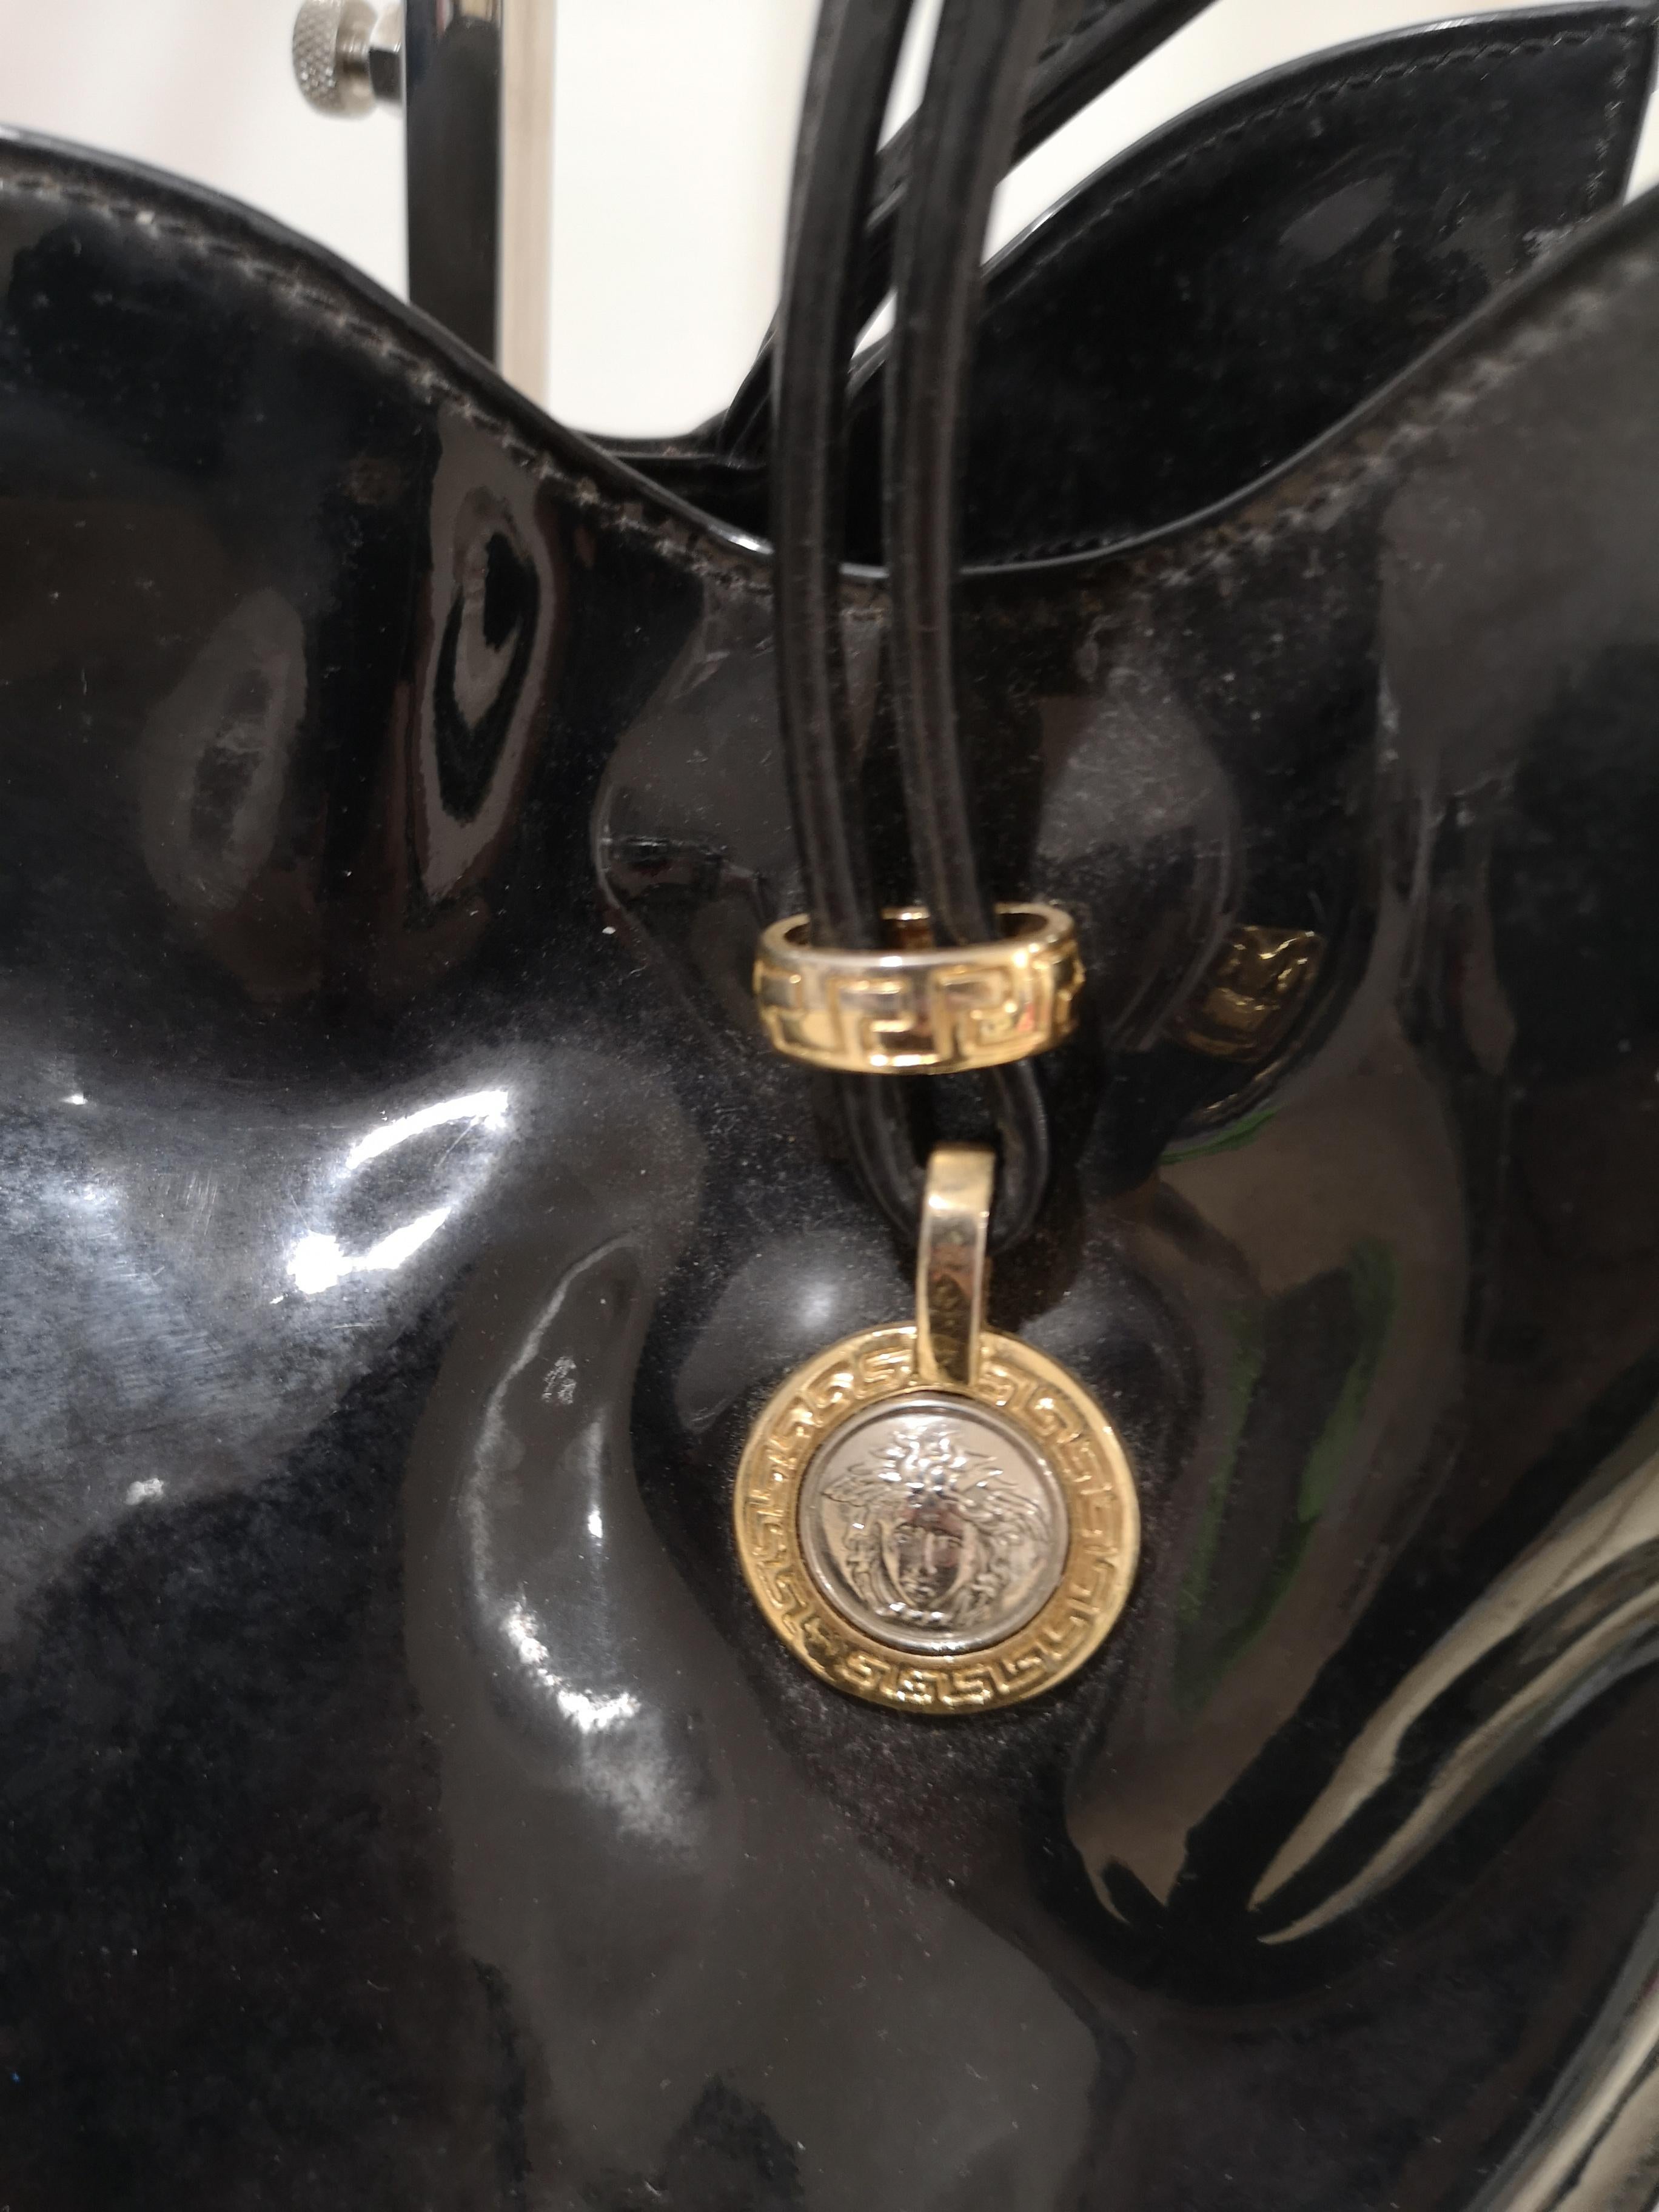 Versace black patent leather shoulder bag
embellished with silver and gold medusa logo
totally made in italy
meaurements: 
33 * 28 cm * depth 7 cm
heigh: bag and handle 72 cm 